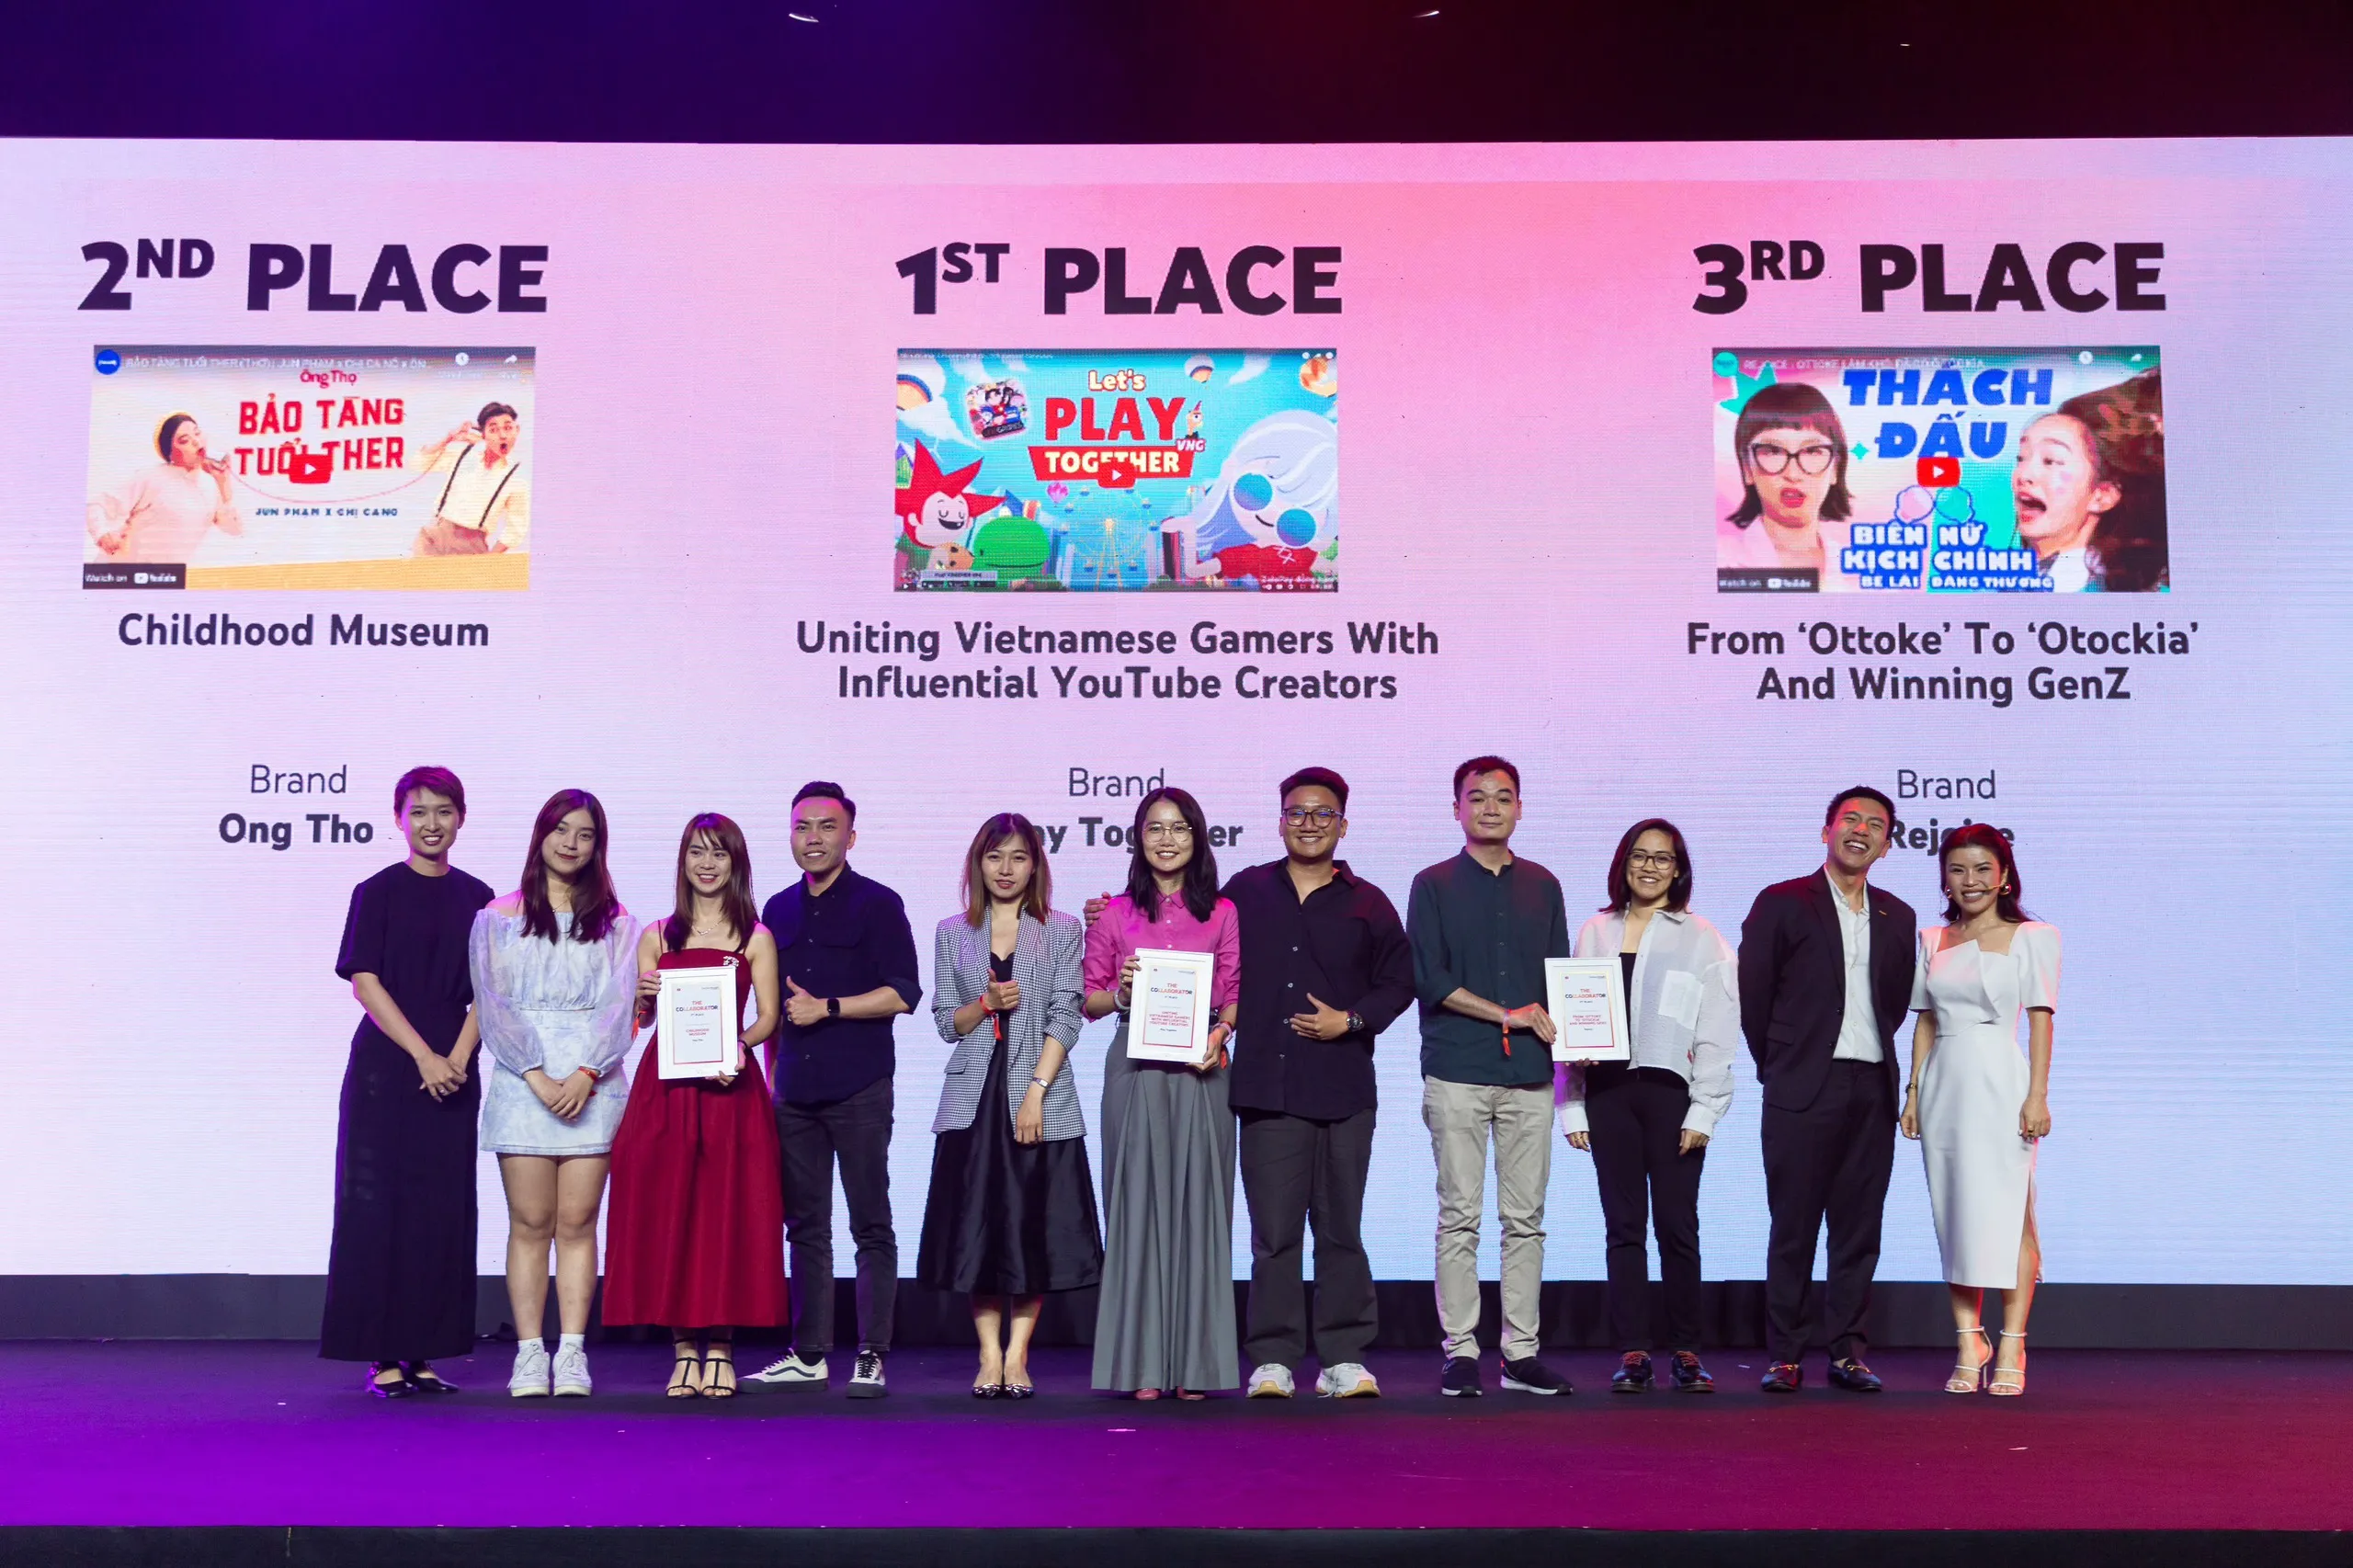 Chiến dịch ra mắt Play Together VNG thắng lớn tại YouTube Works Awards